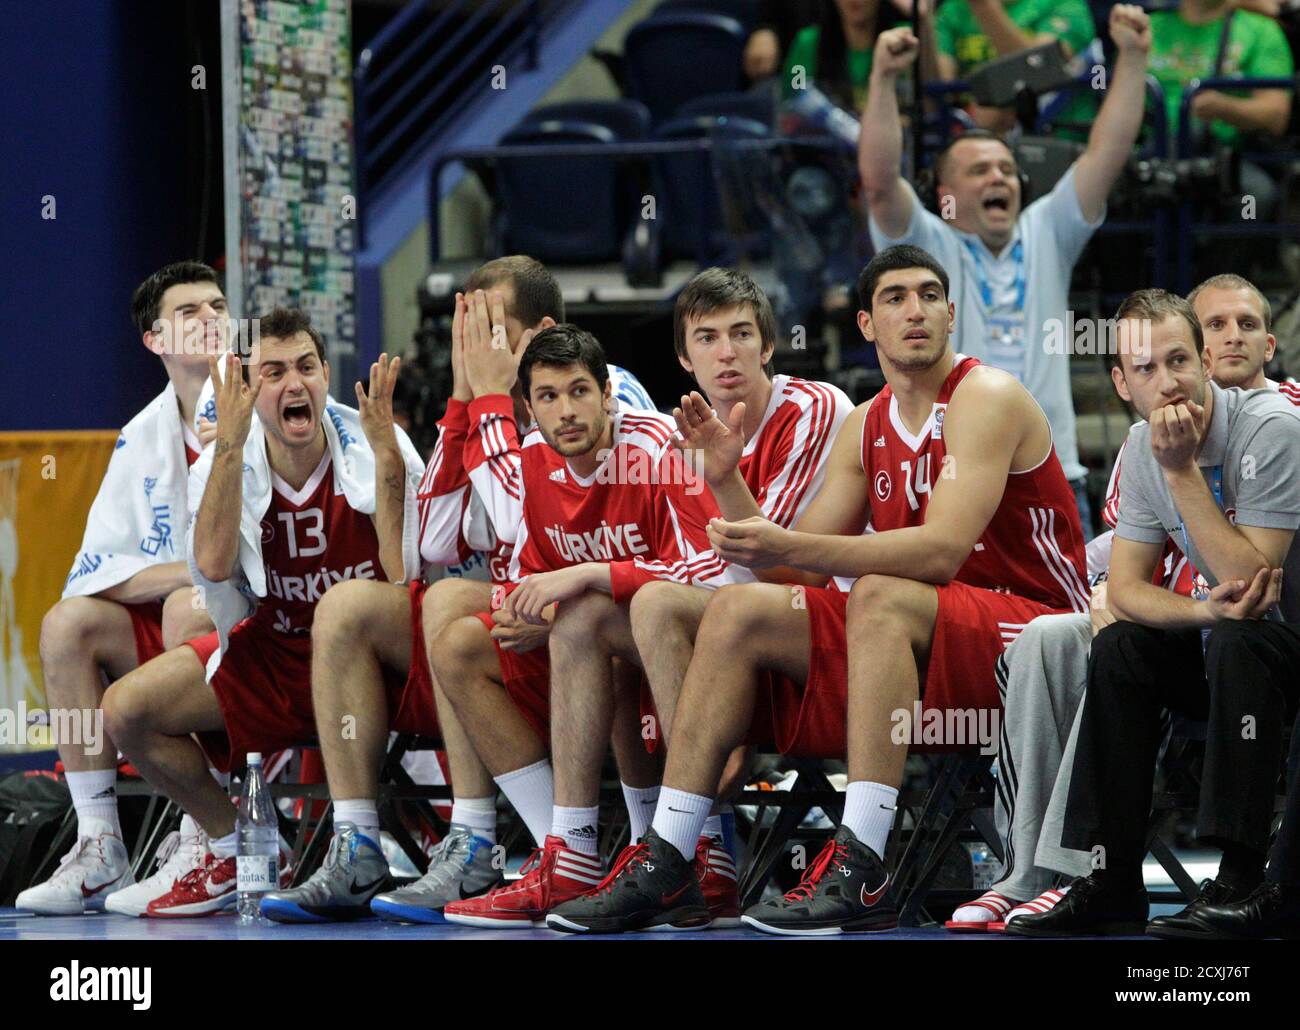 Turkey's Ender Arslan (2nd L) reacts as he sits on the bench with his teammates during their FIBA EuroBasket 2011 Group E basketball game against Germany in Vilnius September 9, 2011.  REUTERS/Ints Kalnins (LITHUANIA - Tags: SPORT BASKETBALL) Stock Photo